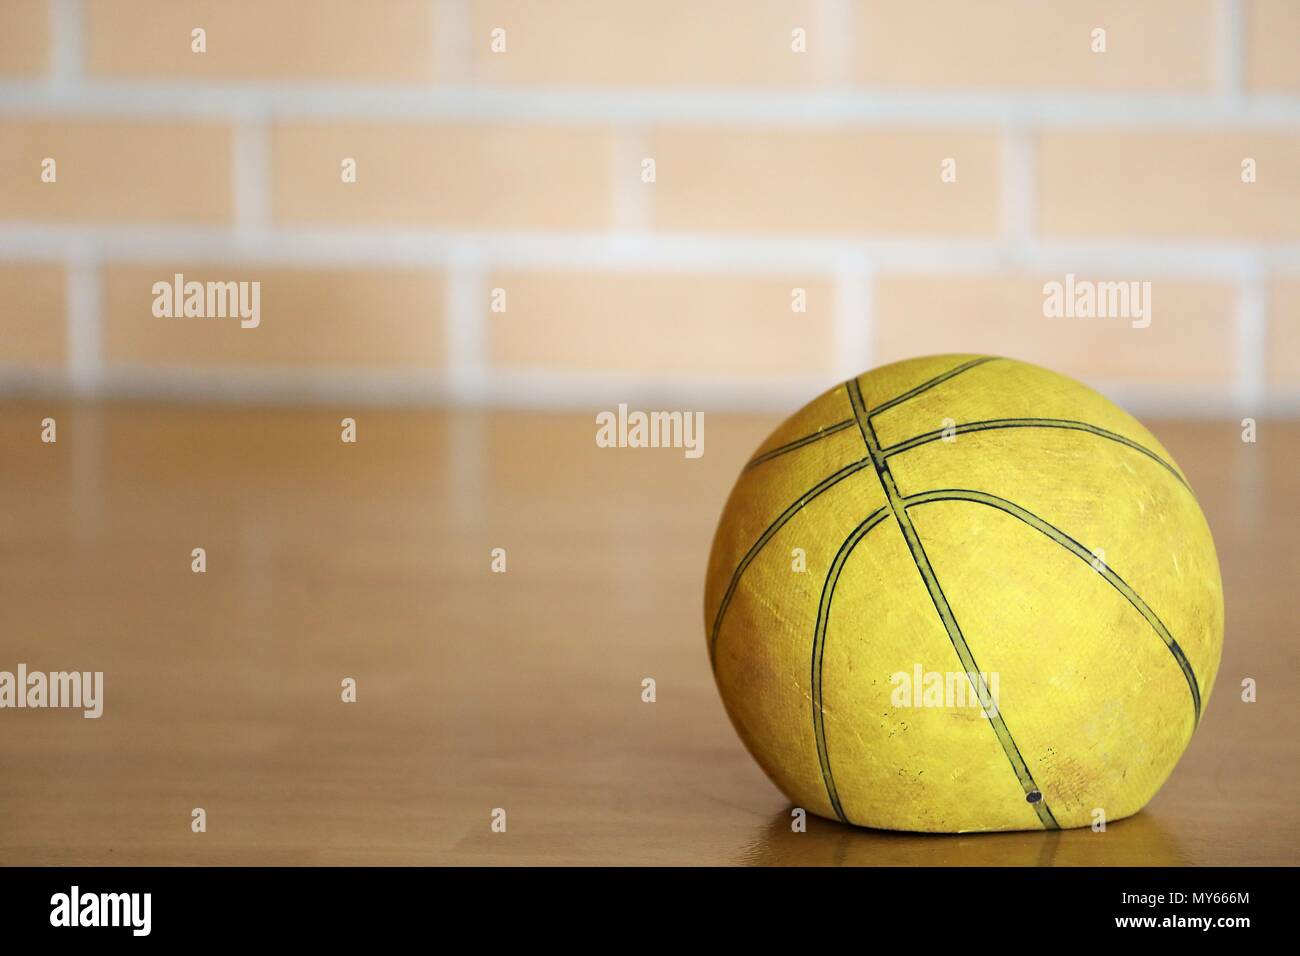 Close up old tired let down deflated worn out spent basketball on a wooden court with blurred brick background. Used sporting equipment, broken, flat, Stock Photo